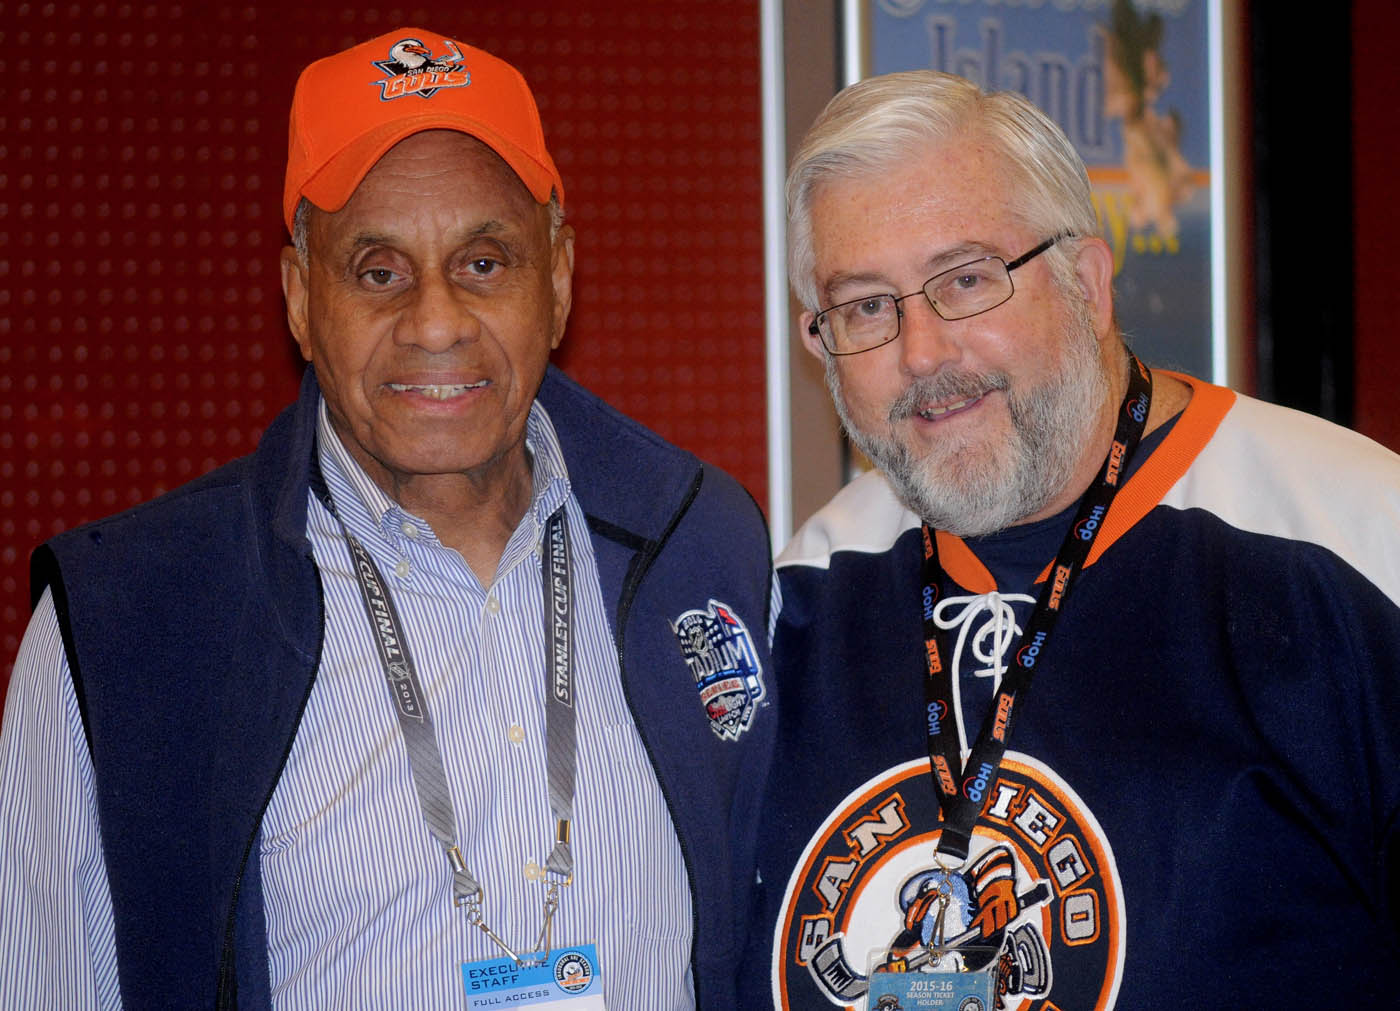 One Of NHL's 100 Greatest Ever To Meet Fans in Utica This Weekend